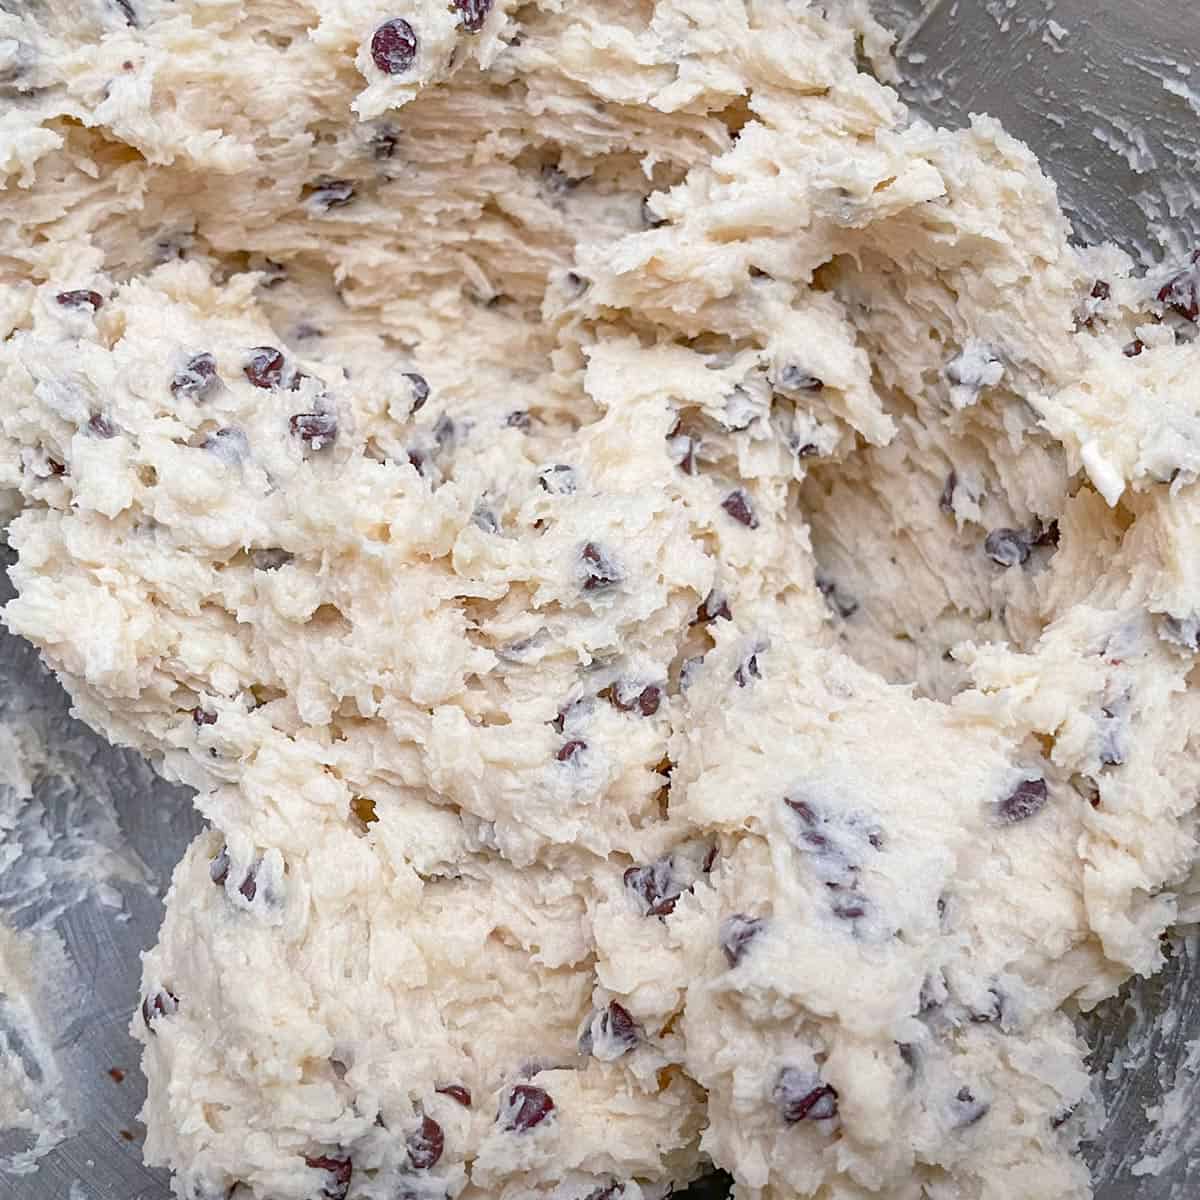 Coconut, almonds, and chocolate chips have been added to the cookie dough.